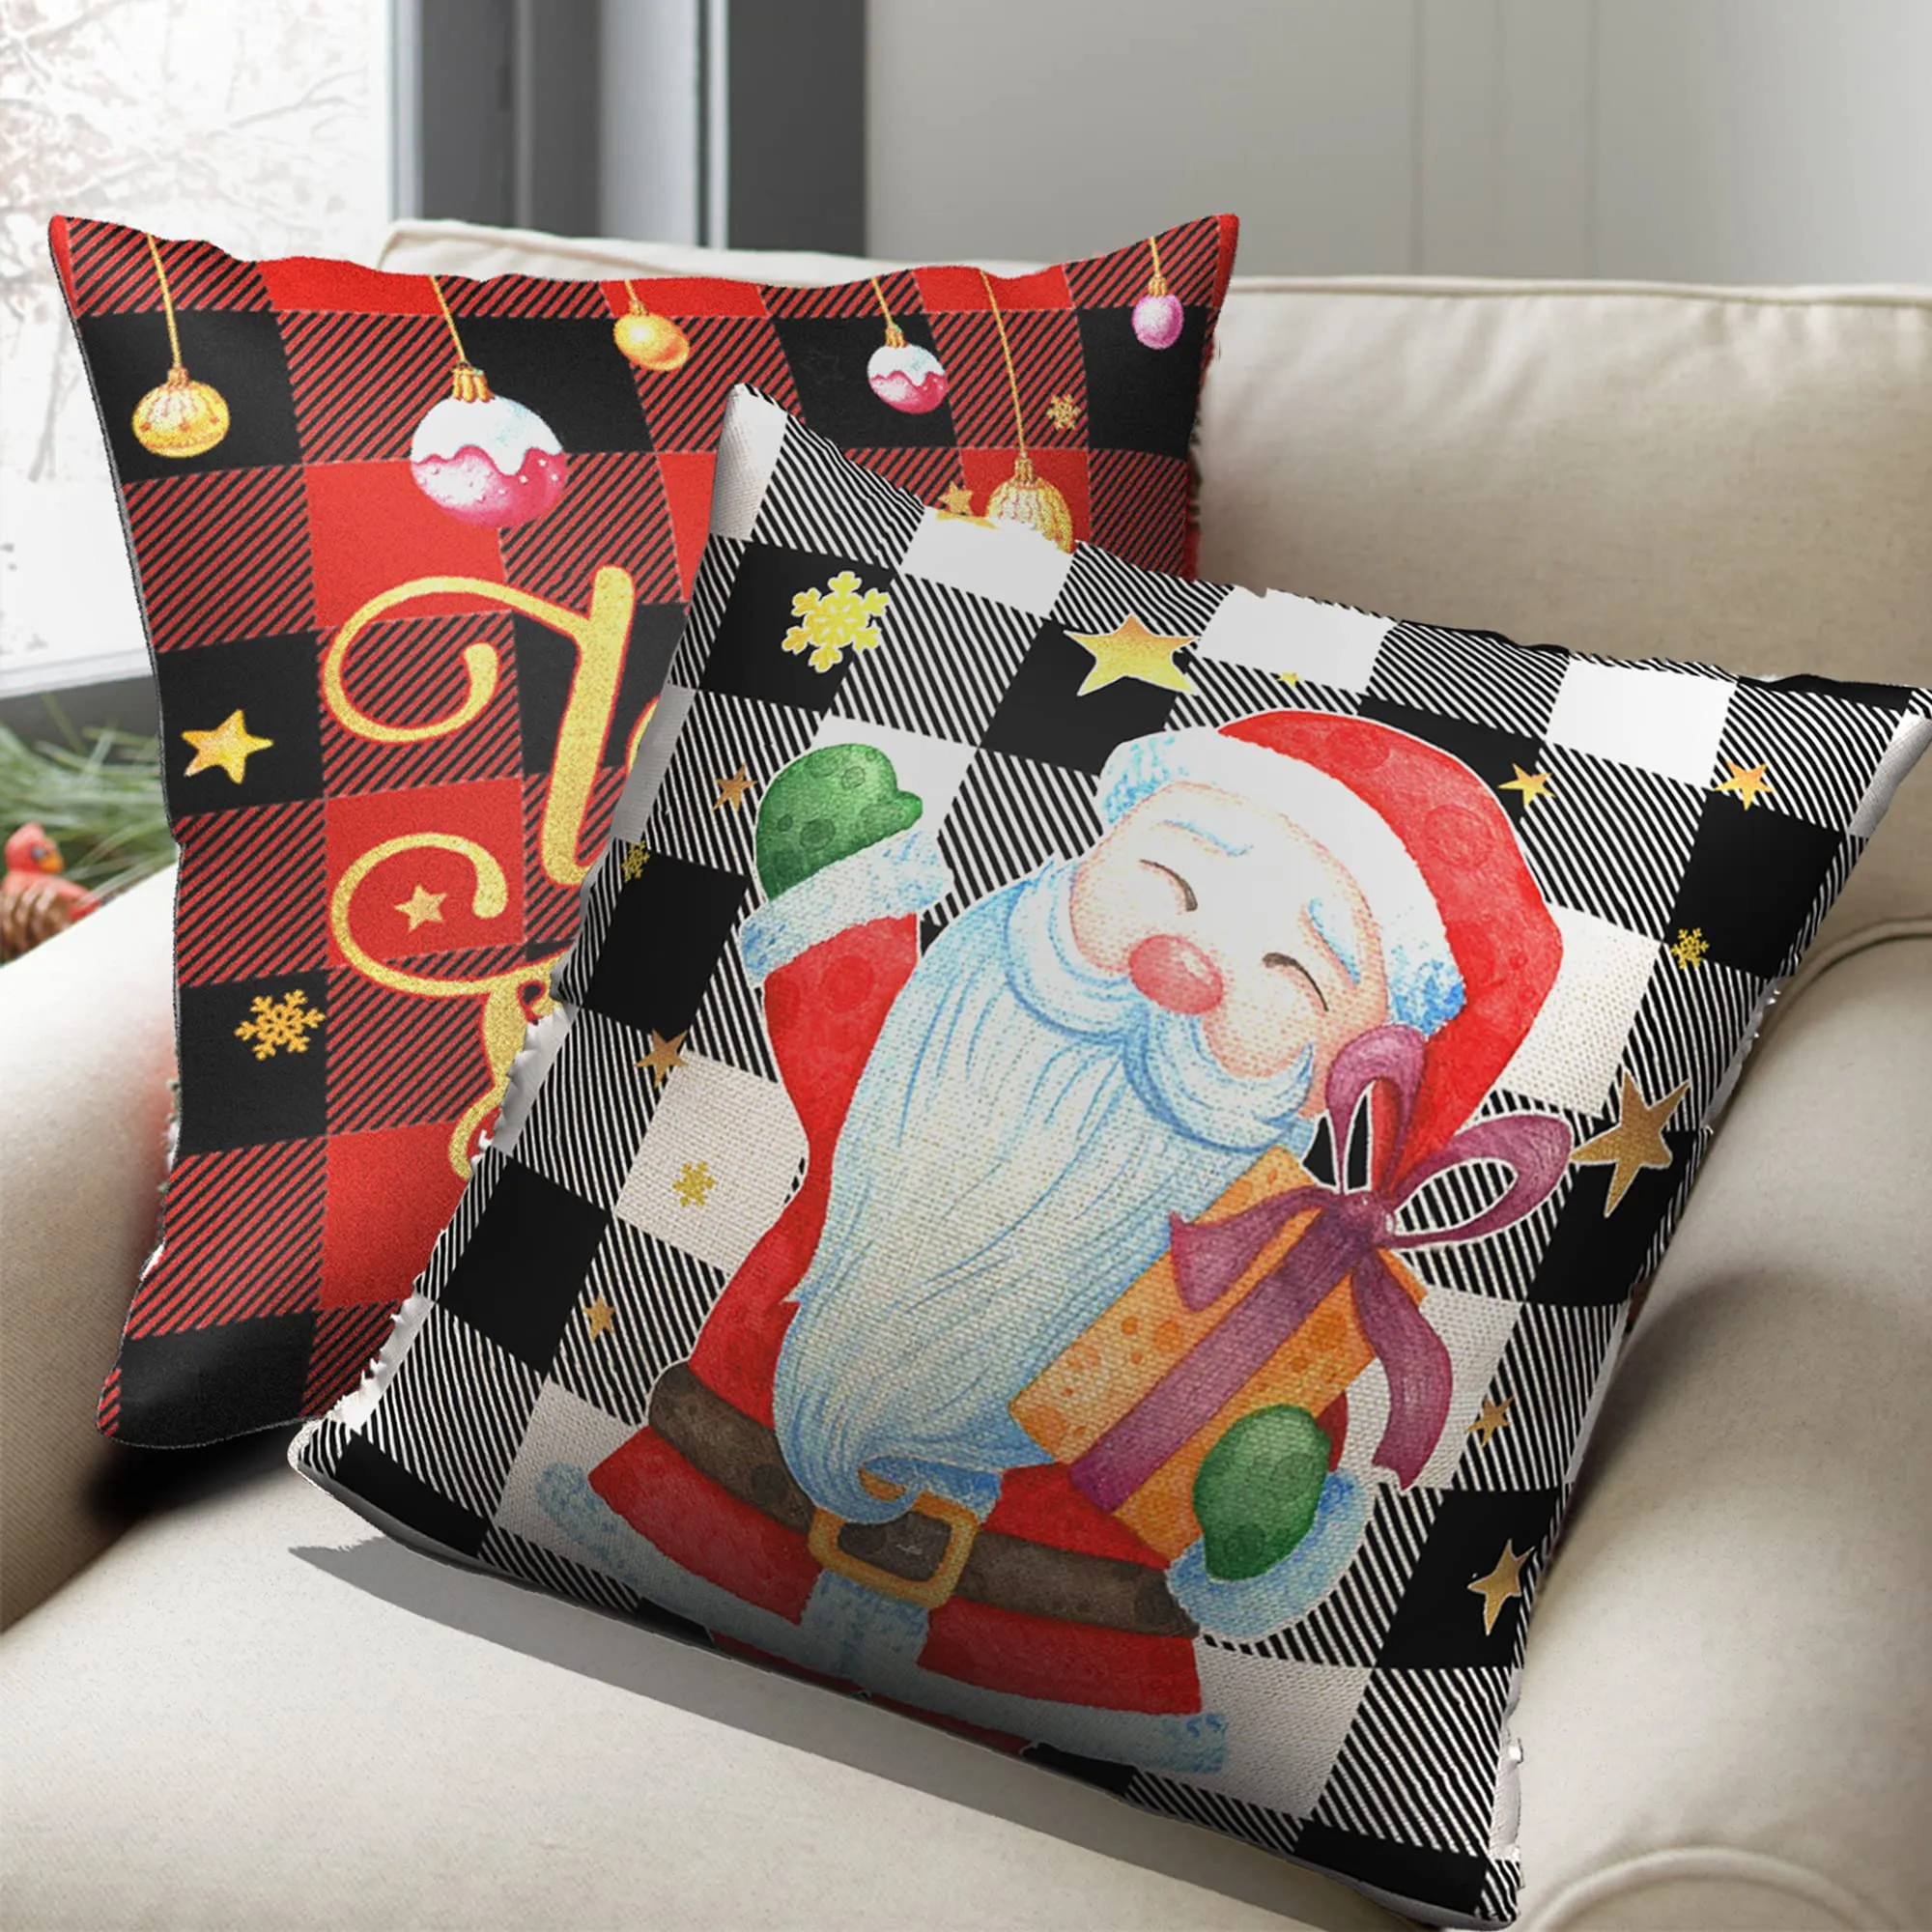 christmas pillow covers  plaid christmas pillow covers 18x18 set of 4, black red christmas decorations, decorative christmas throw pillow covers, winter holiday pillowcase with santa claus deer